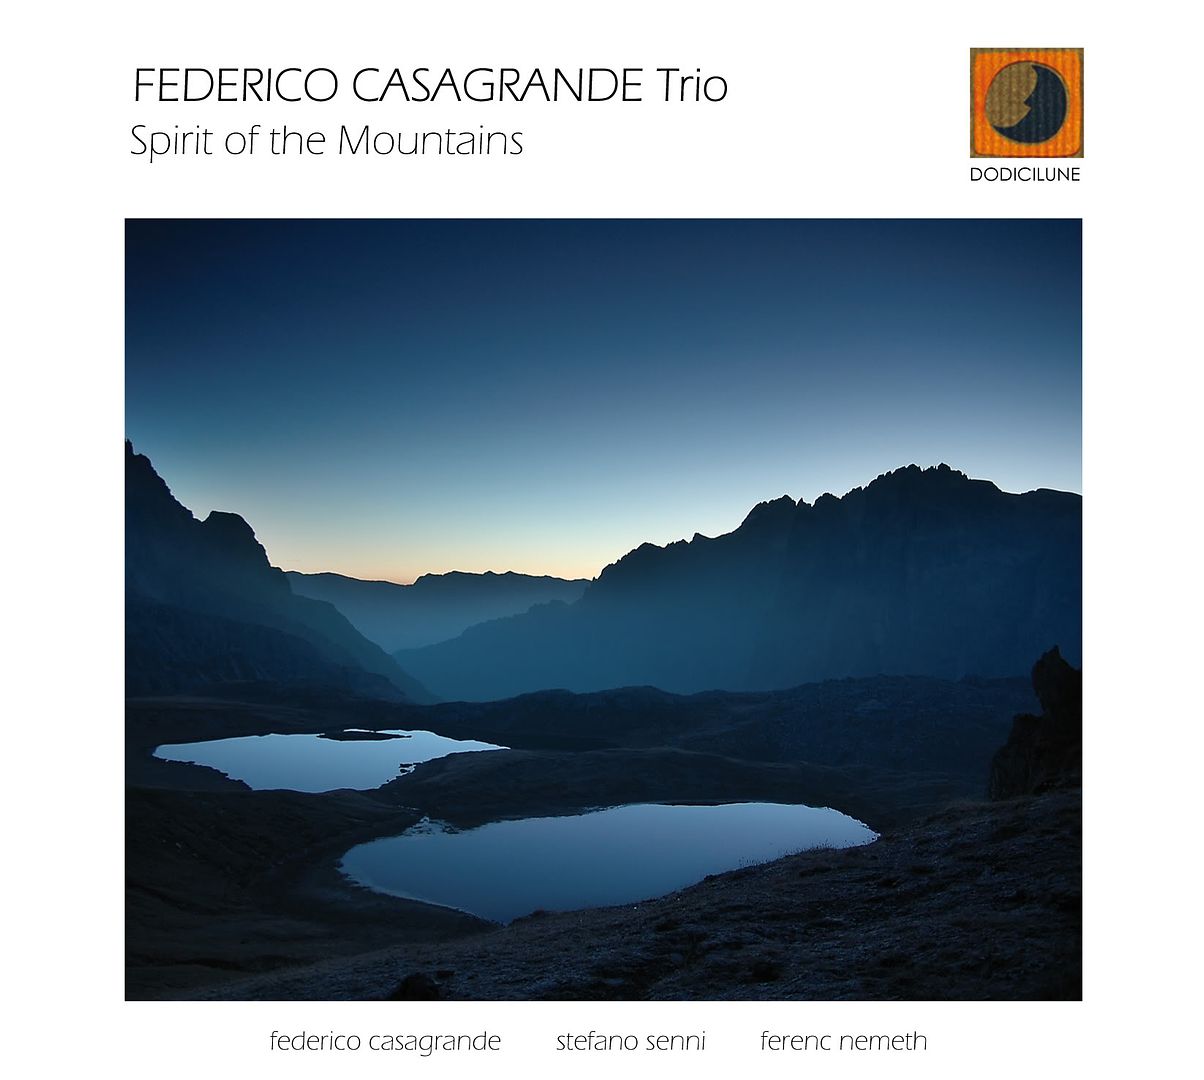 Spirit of the Mountains by Federico Casagrande